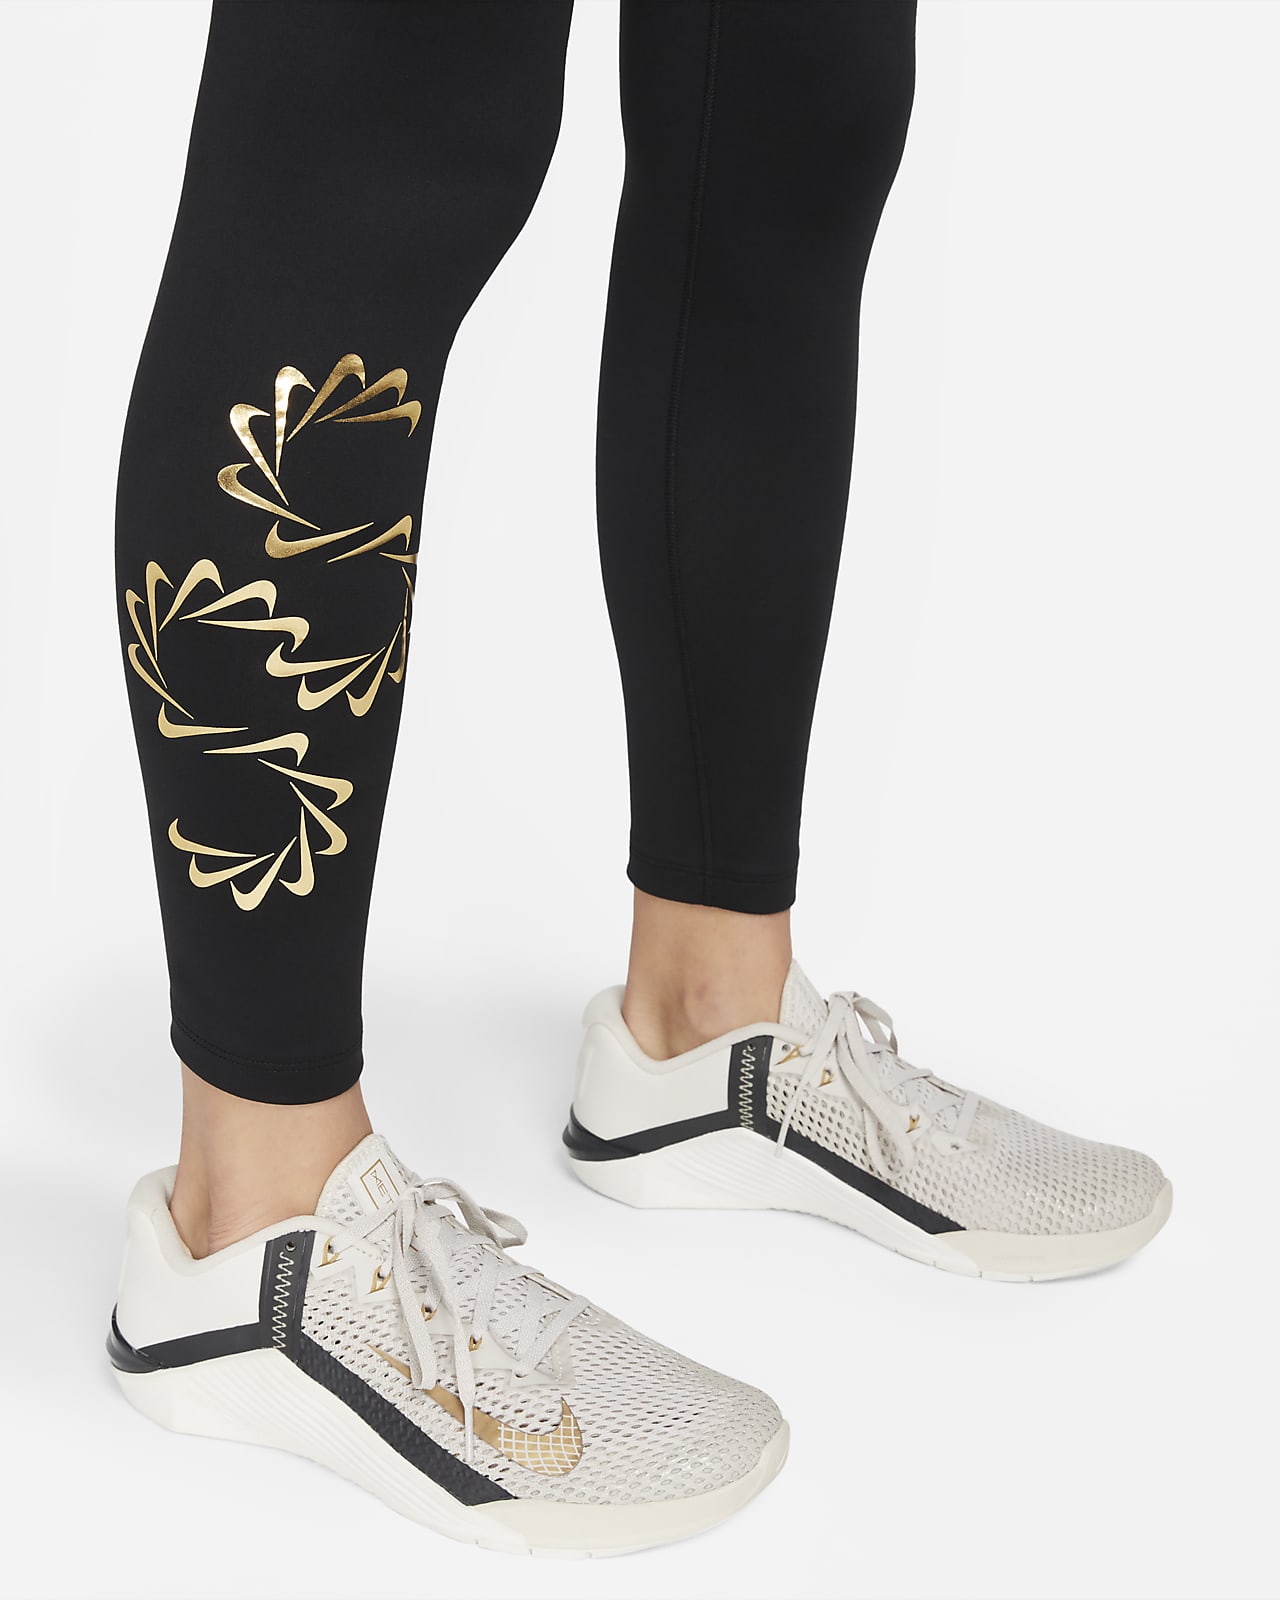 Nike Therma-FIT One Women's Mid-Rise Graphic Training Leggings